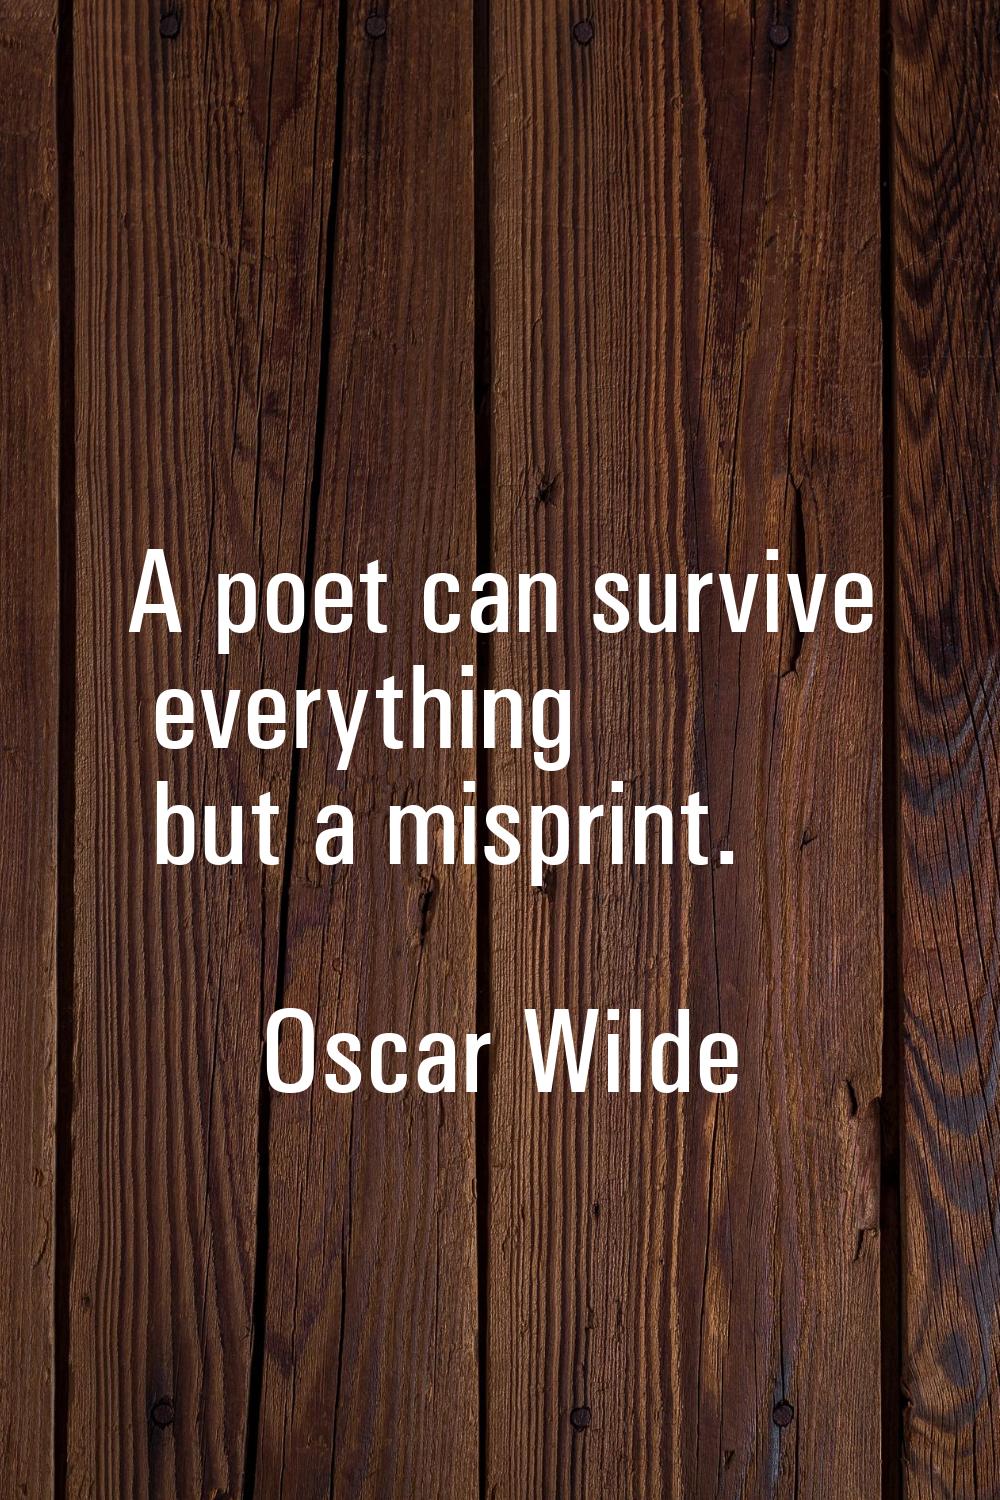 A poet can survive everything but a misprint.